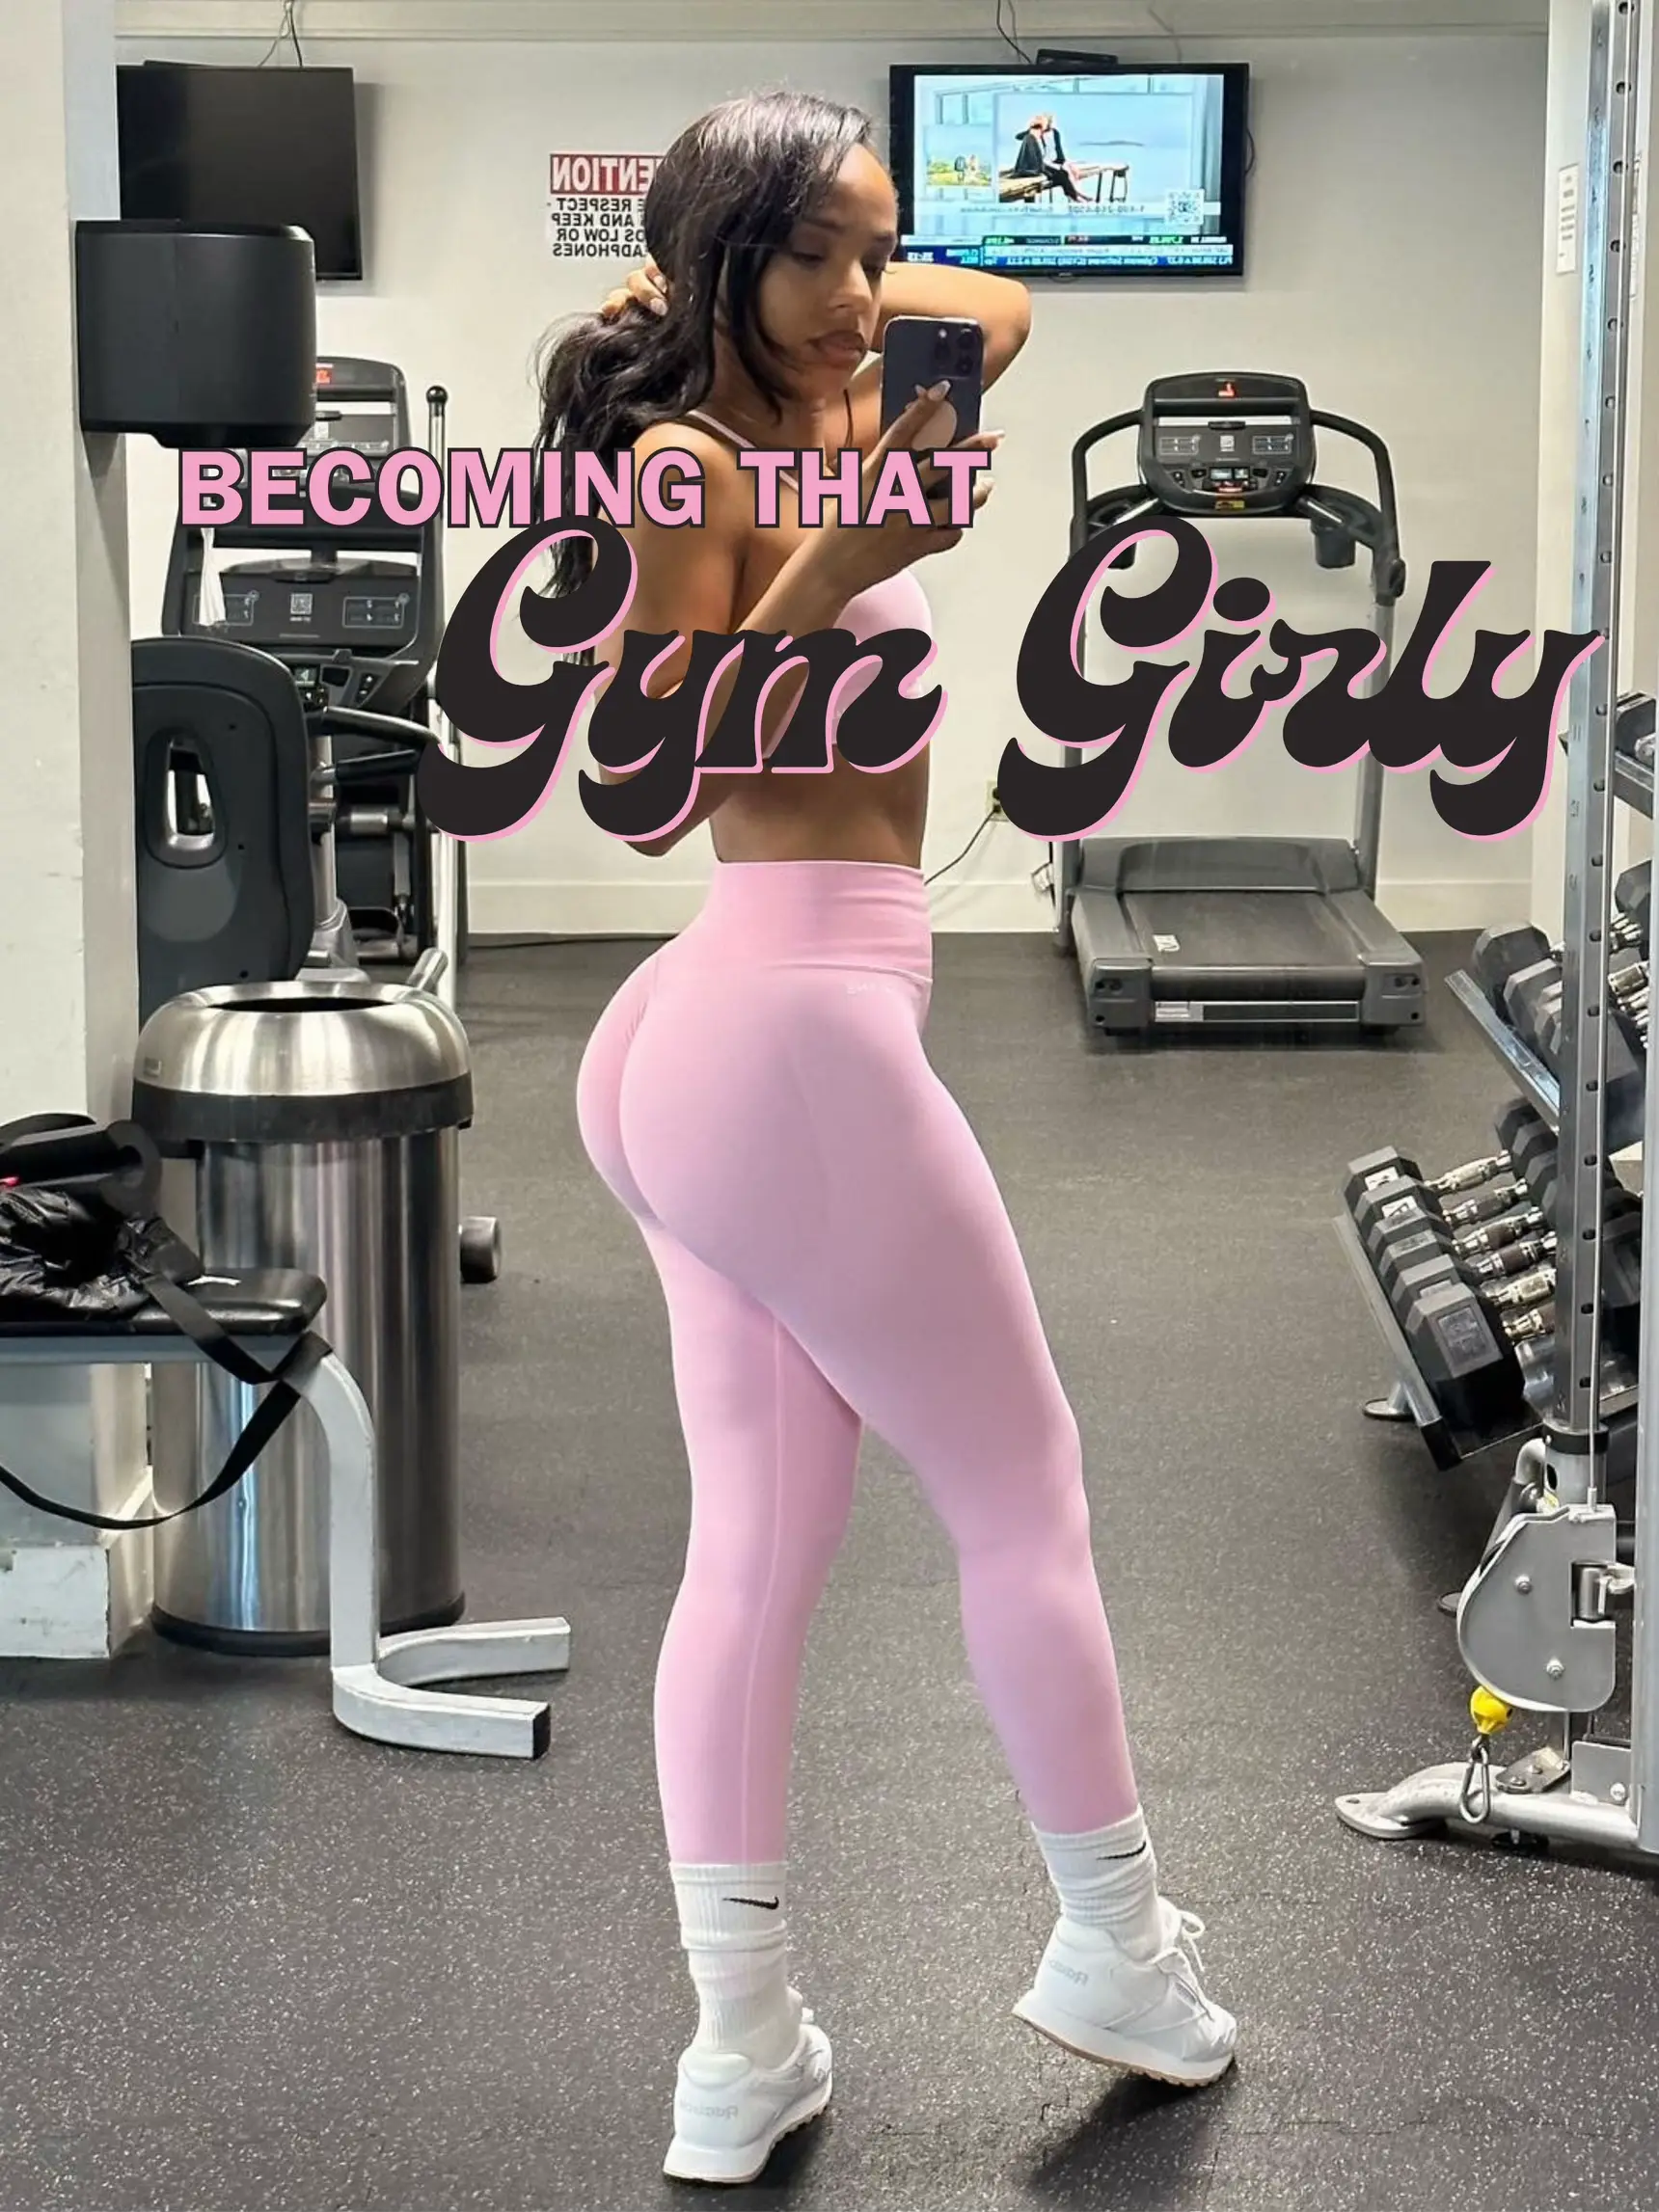 Gym GRWM, Gallery posted by kbedfitness